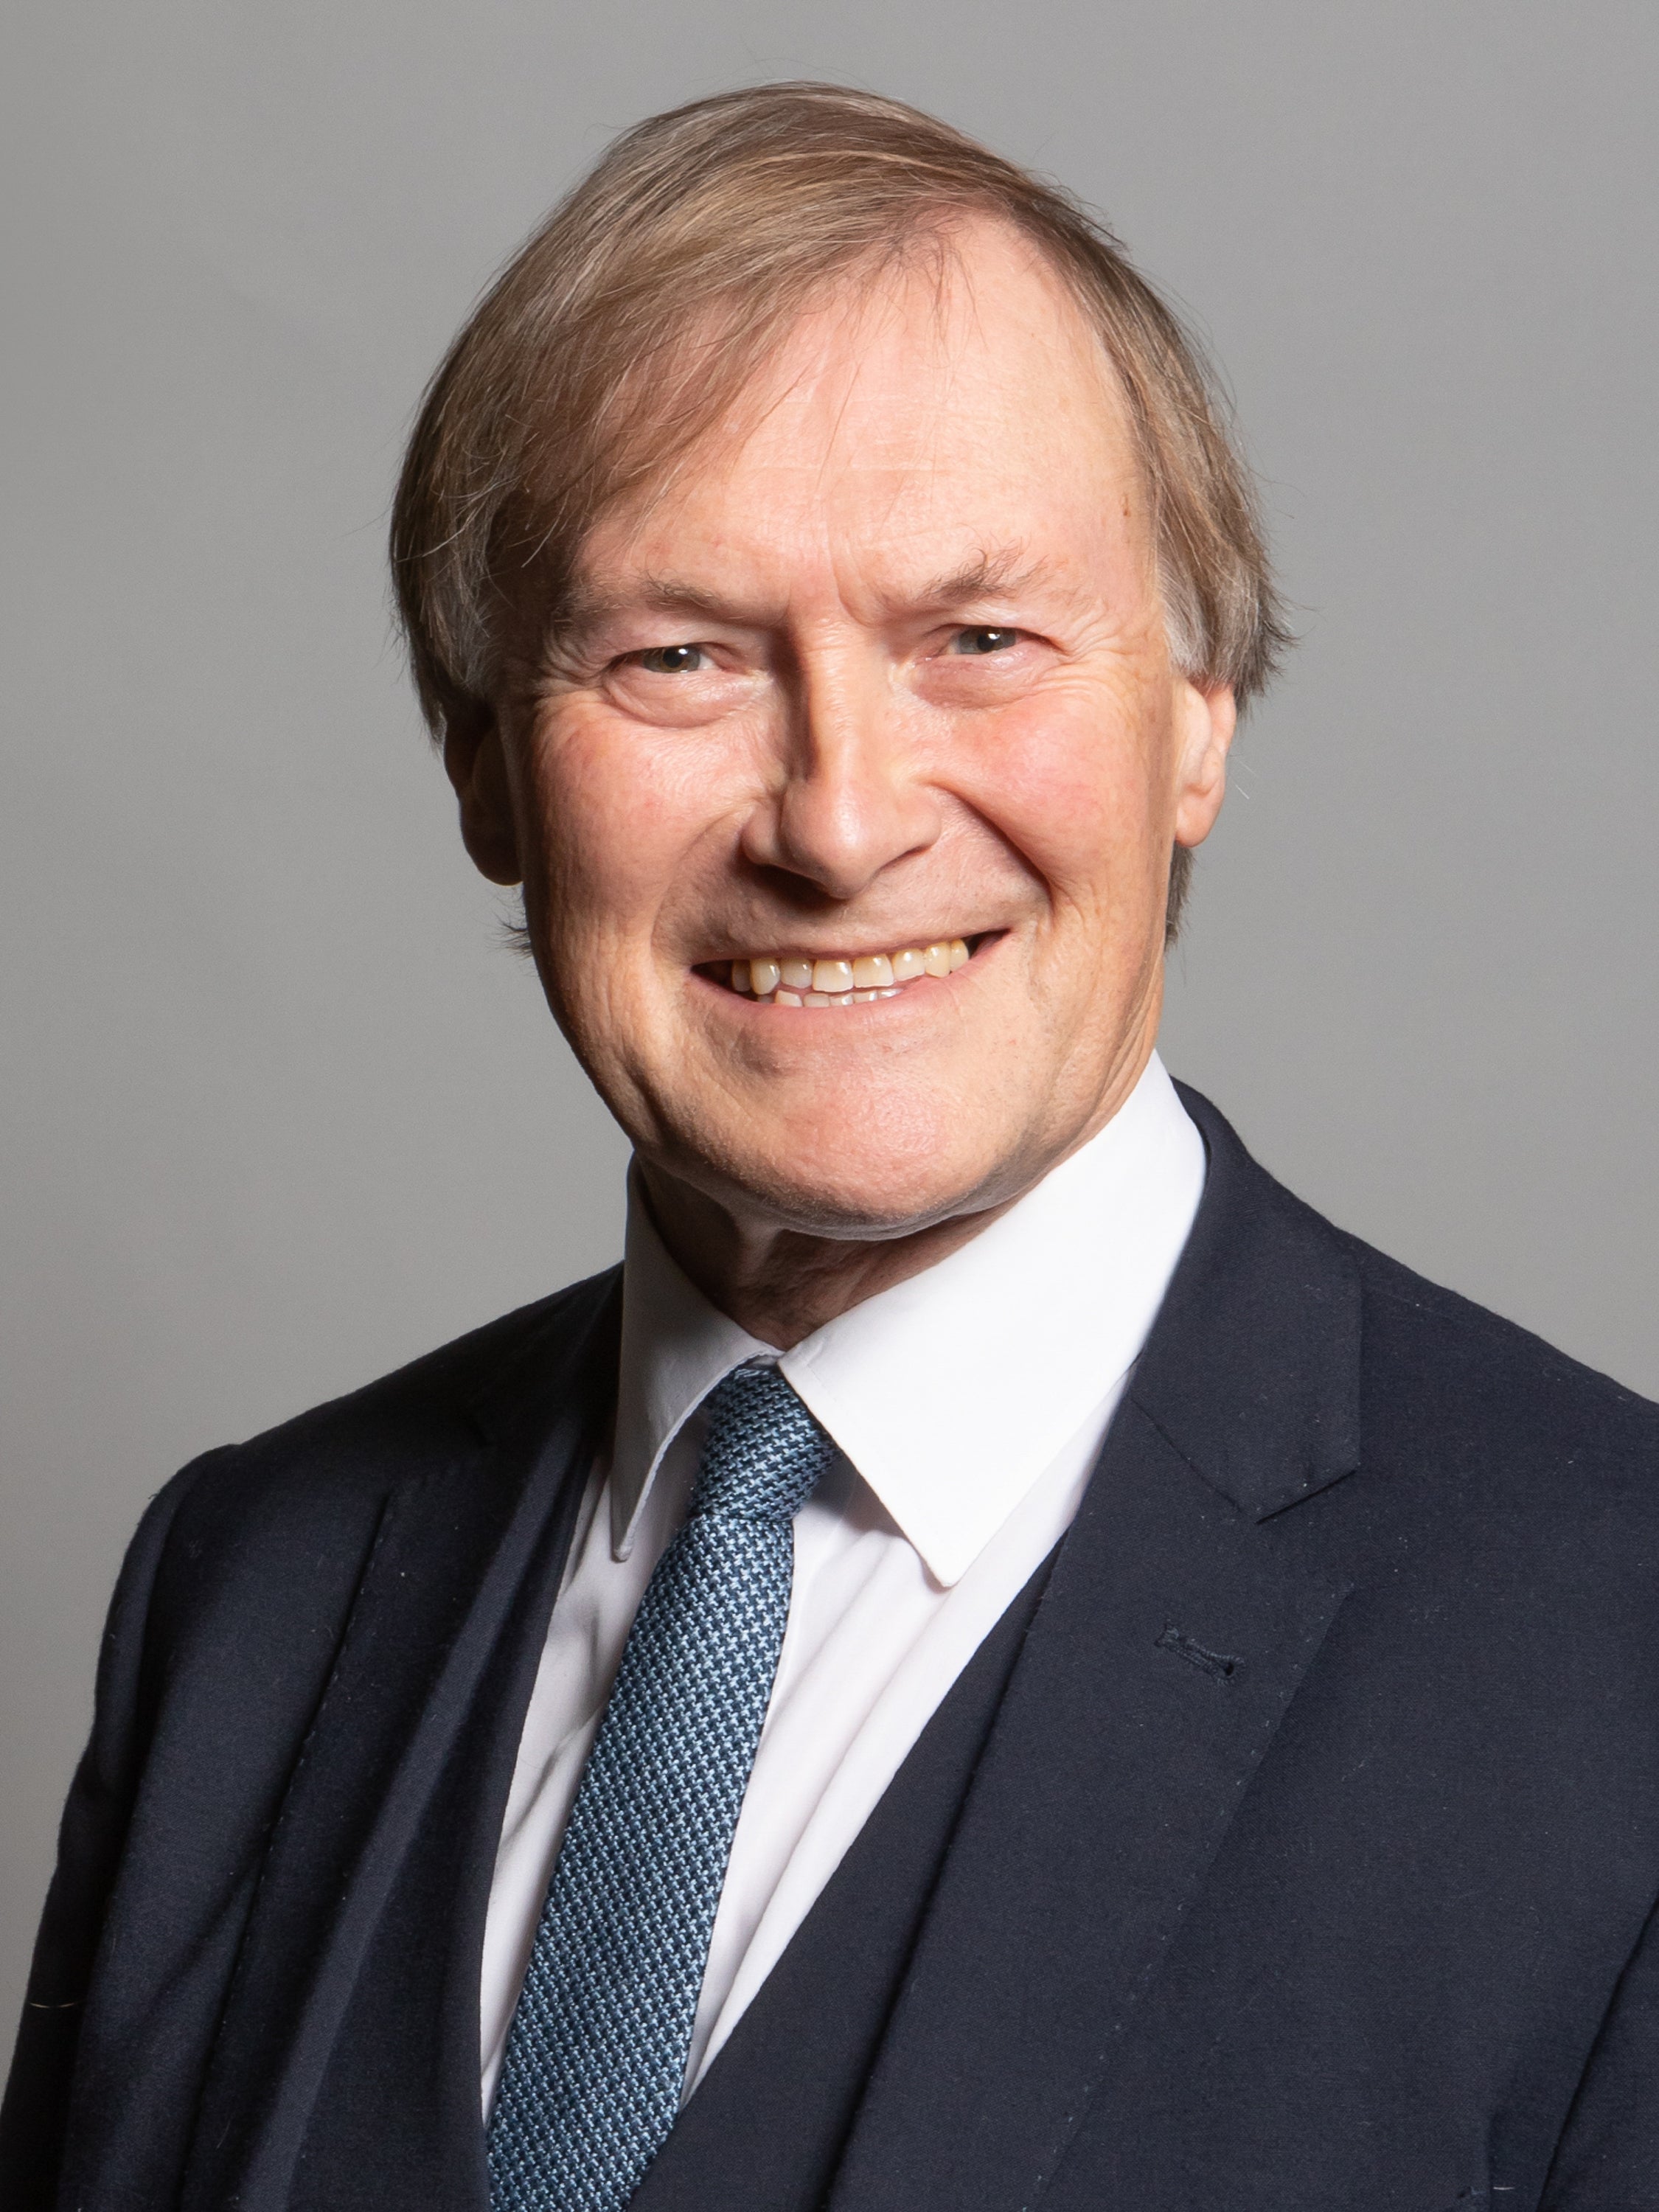 Sir David Amess was stabbed to death during a constituency surgery in September 2021 (Chris McAndrew/UK Parliament/PA)